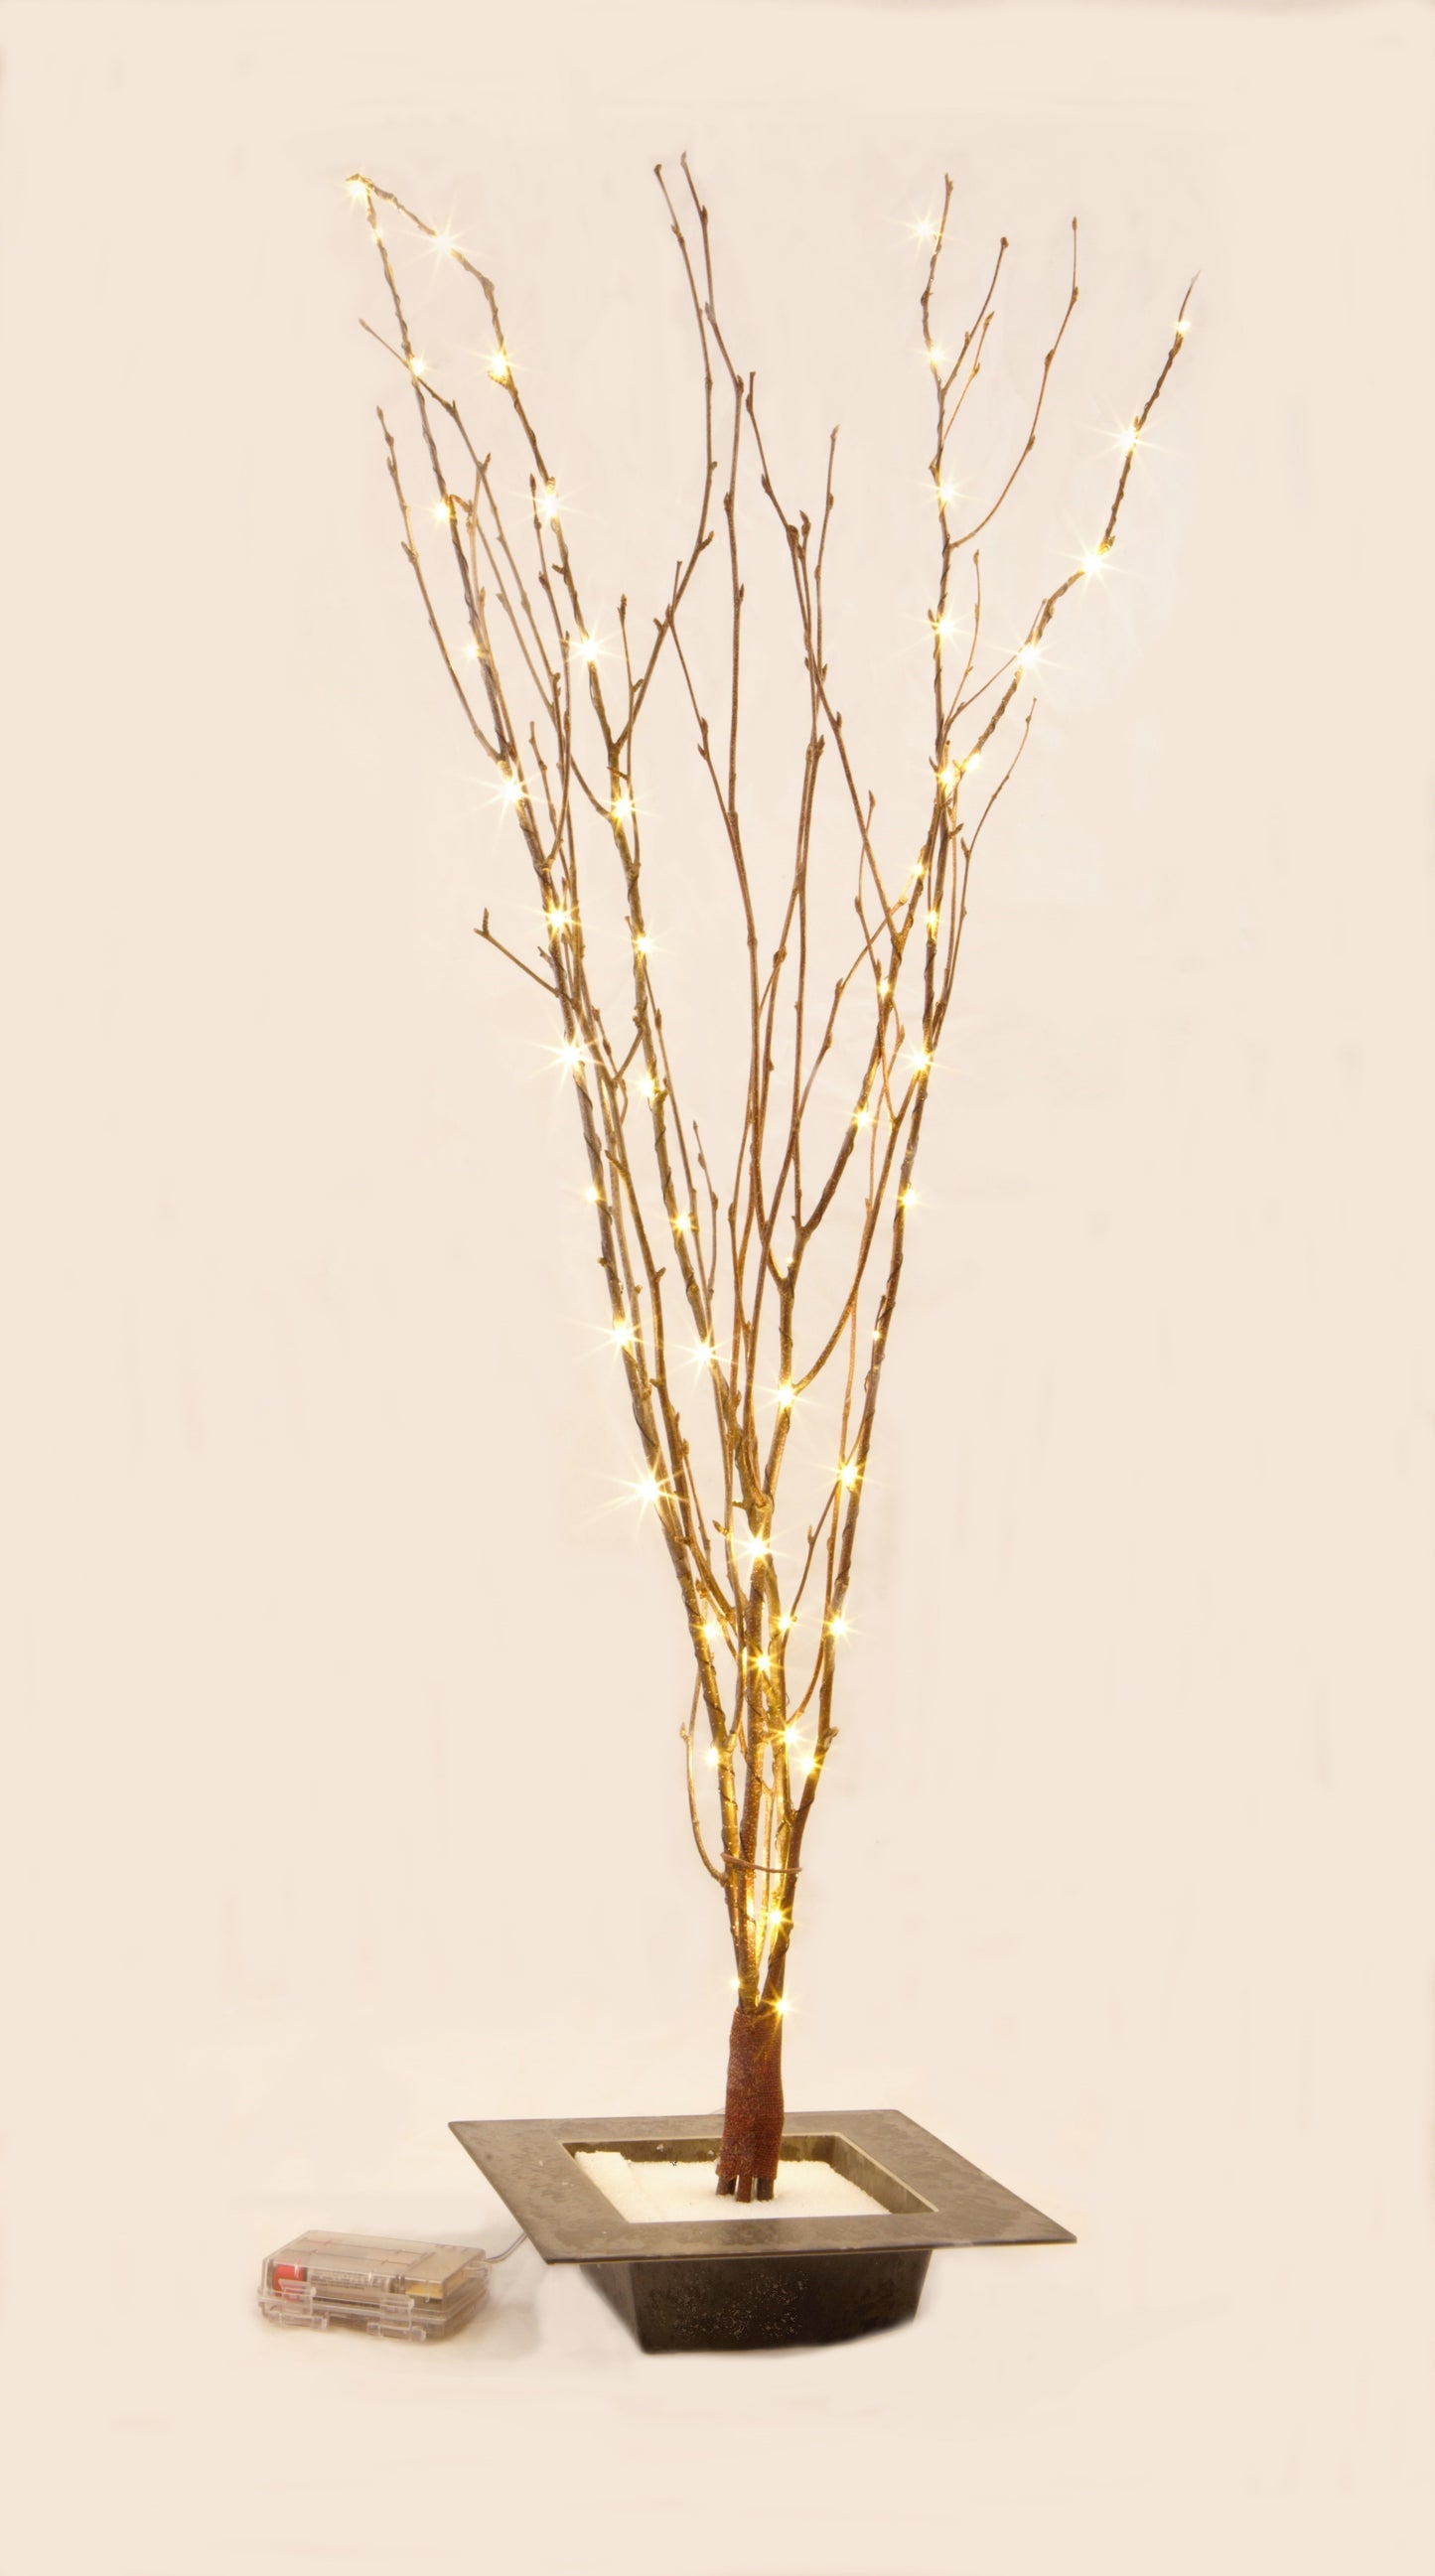 LED Lighted Natural Birch Branches with 8 Function Remote